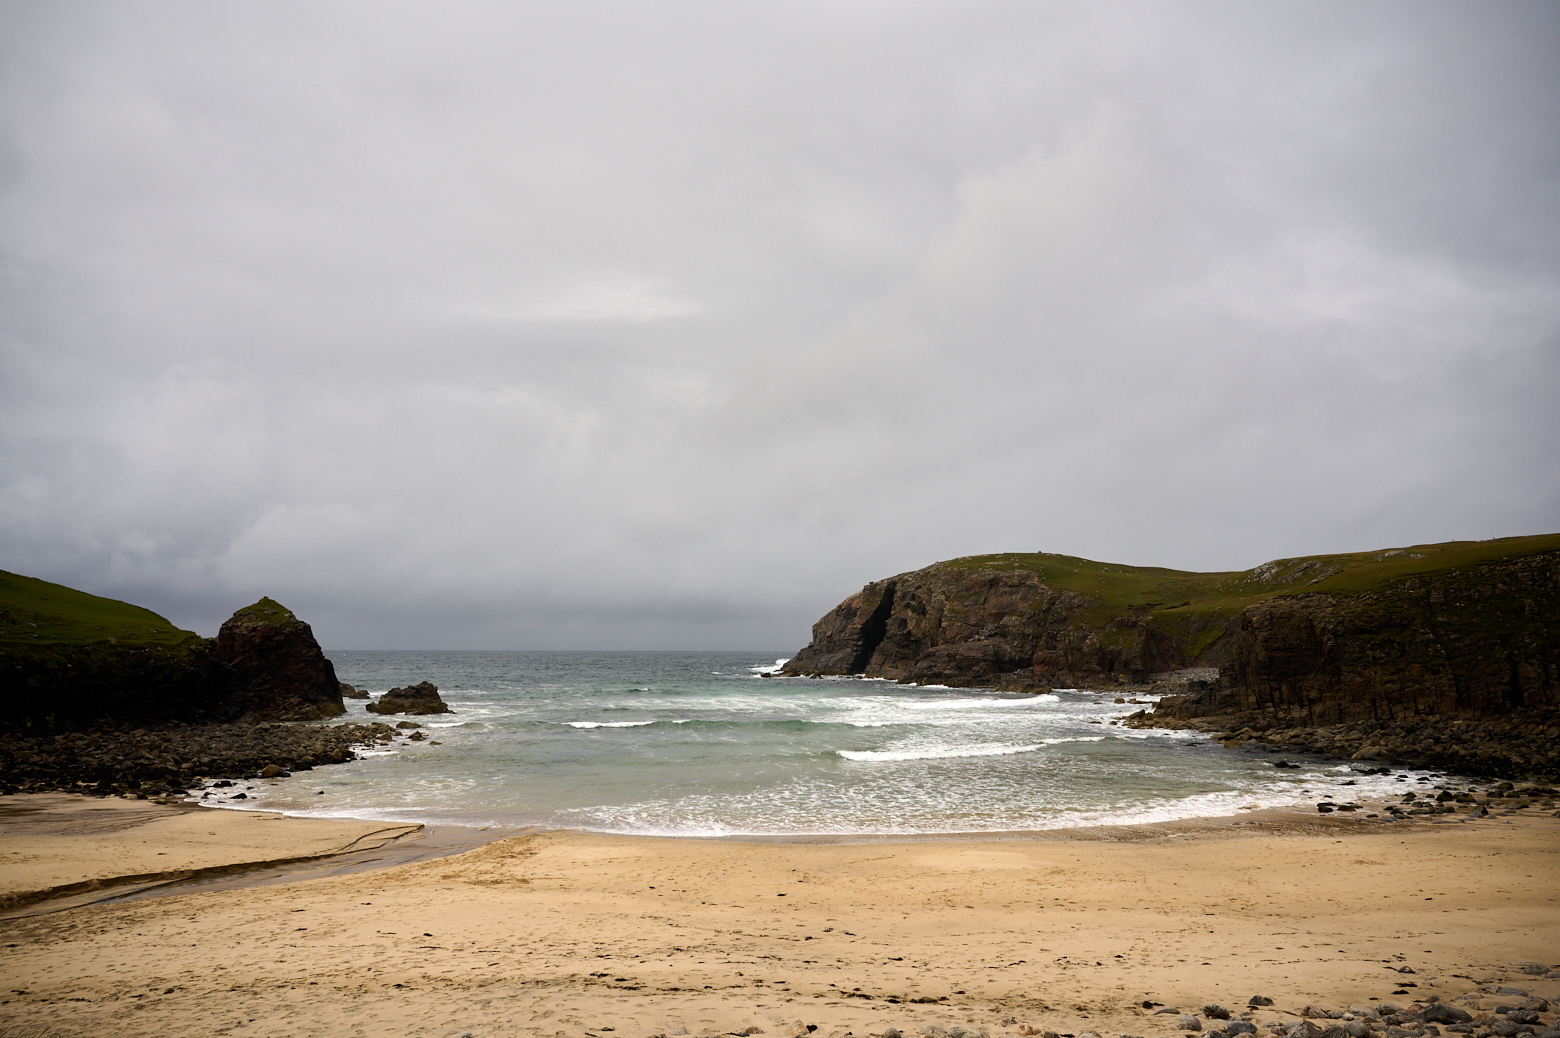 A walk along Dalmore beach in the Isle of Lewis, Outer Hebrides.